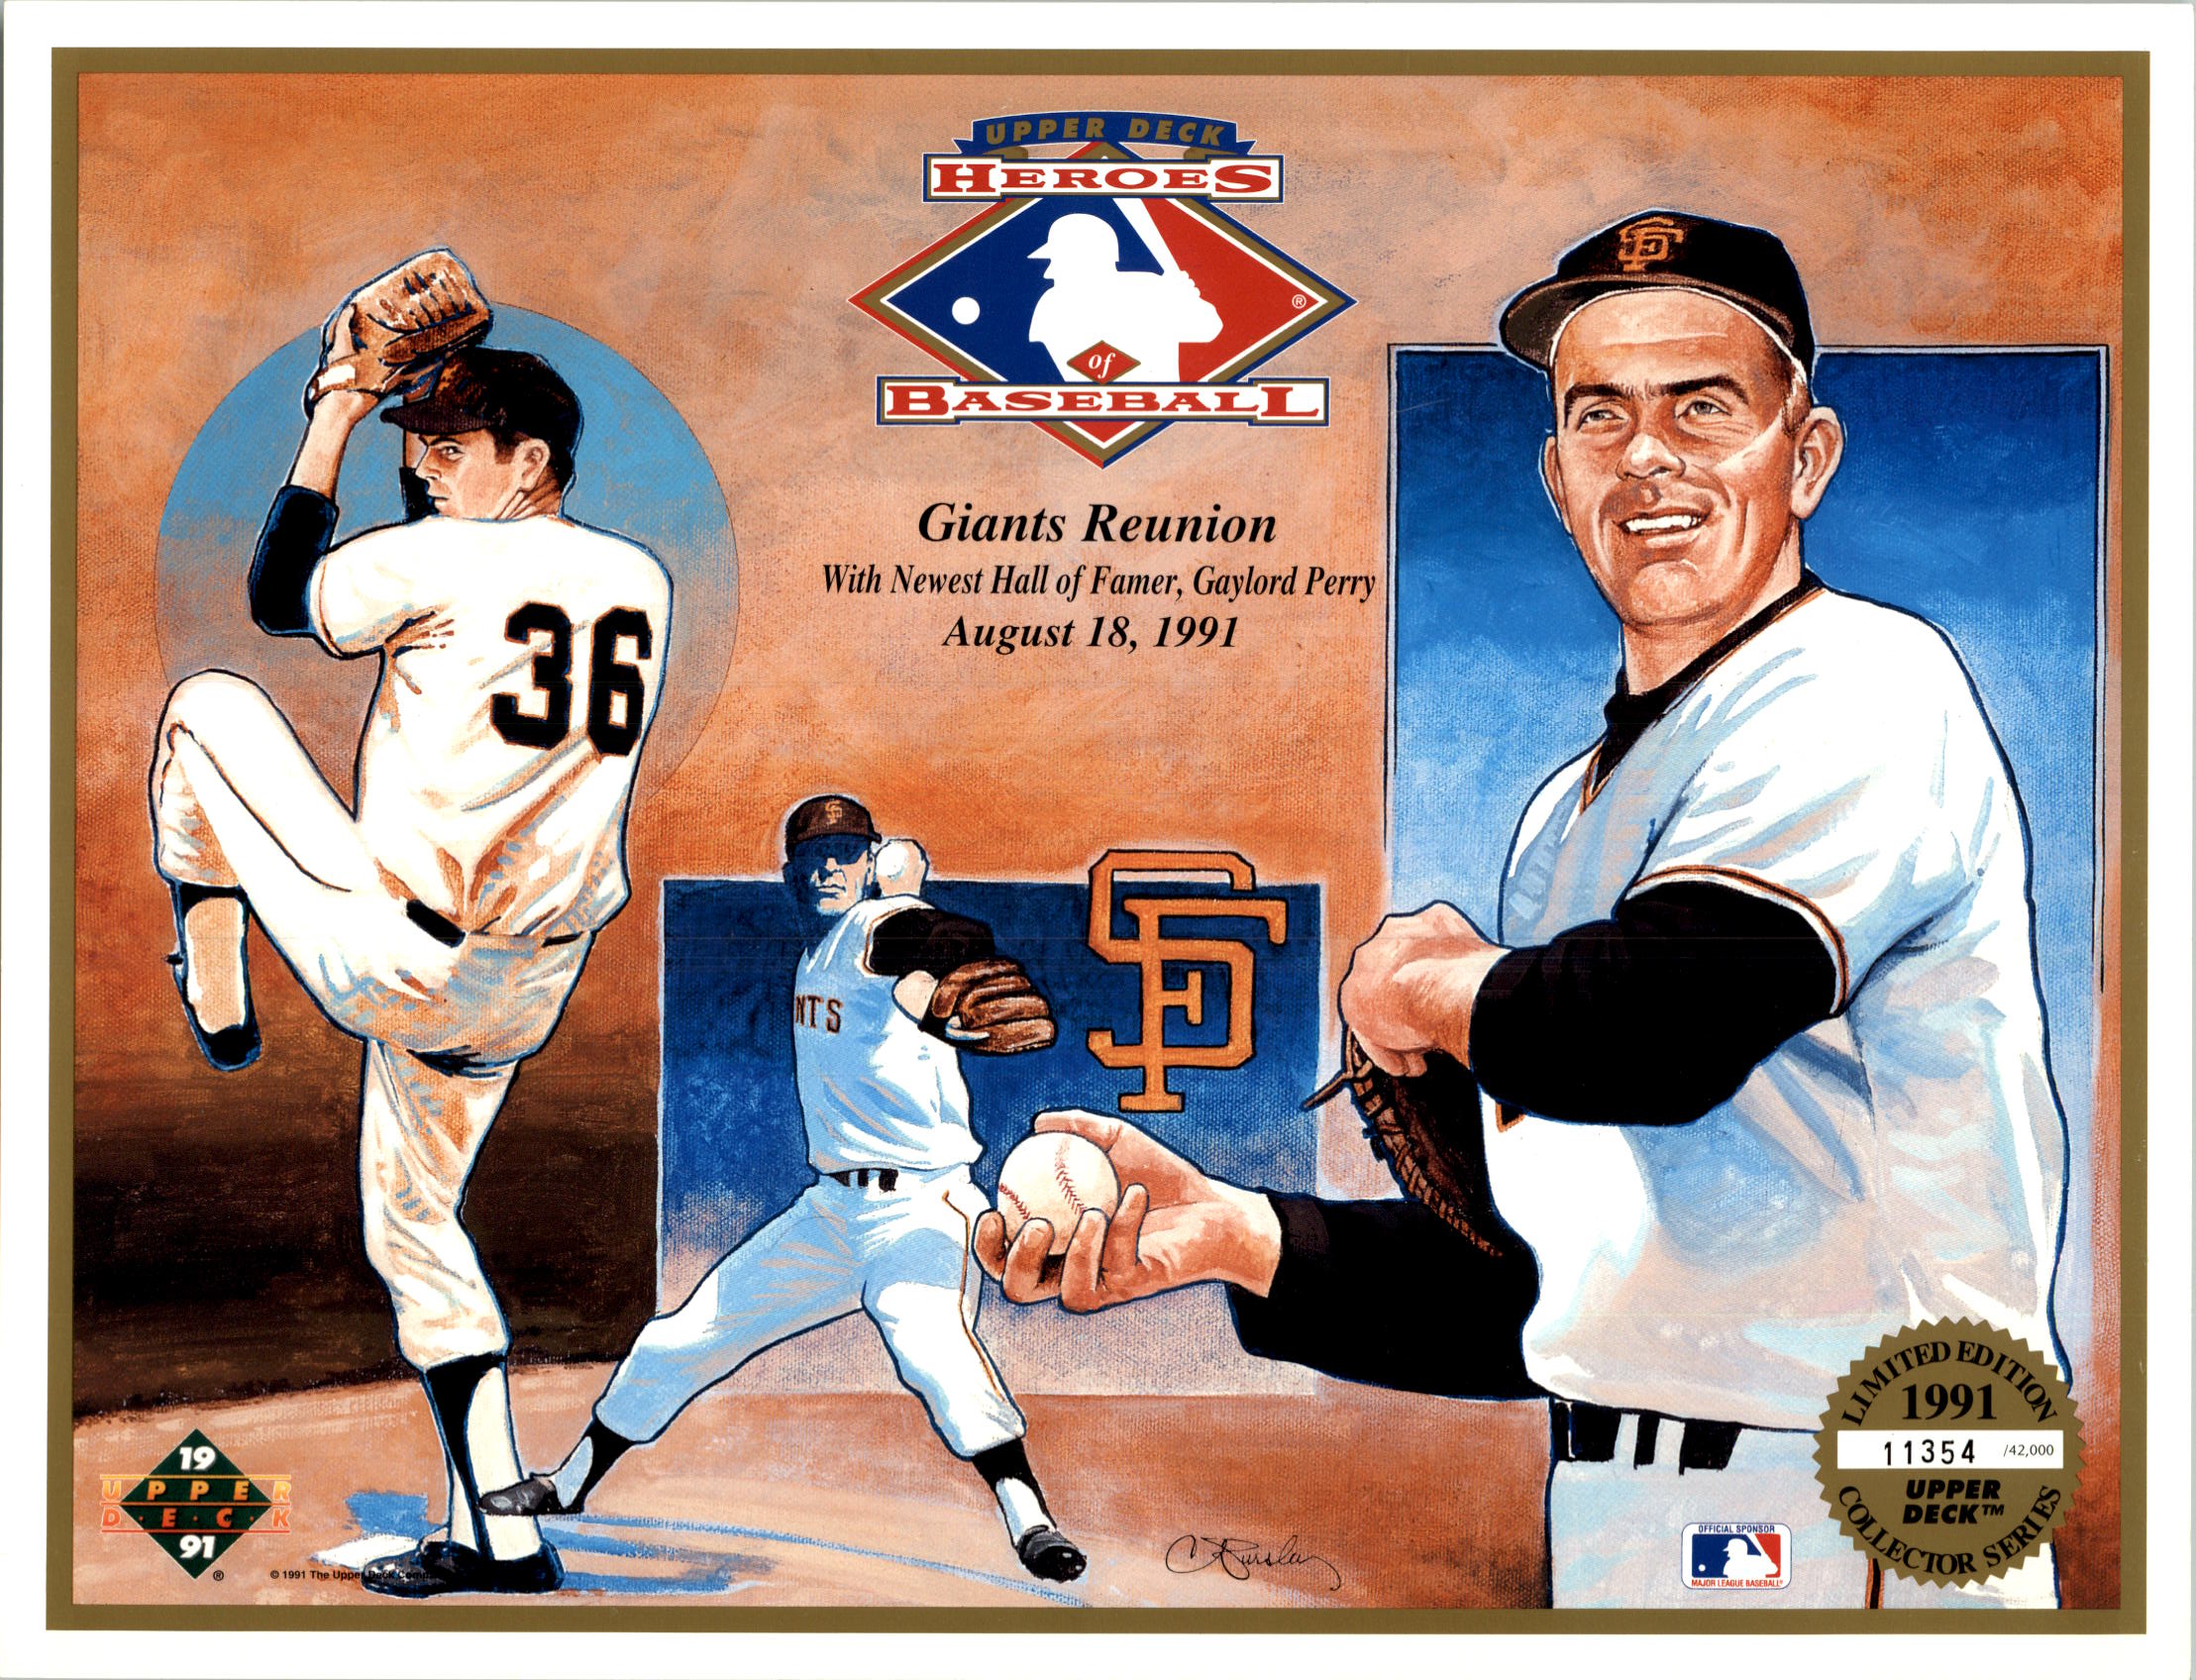 1991 Upper Deck Sheets #20 Giants Reunion with/Newest Hall of Famer/Aug. 18